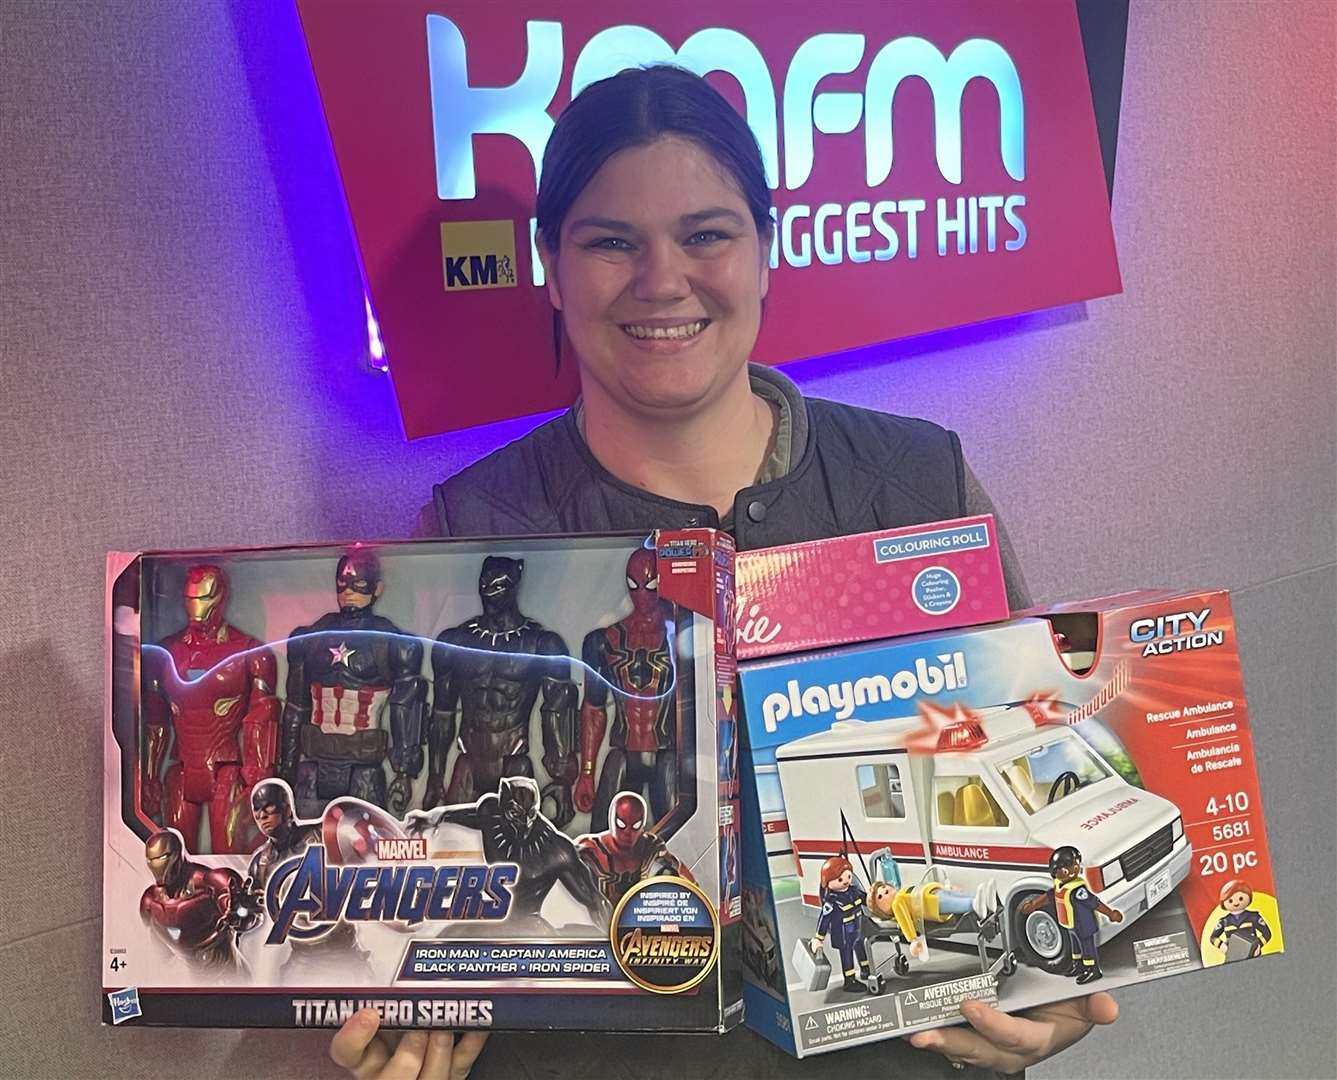 Katy Clements, community champion of Morrisons' Larkfield store, with some of the toys she dropped off to the kmfm studios